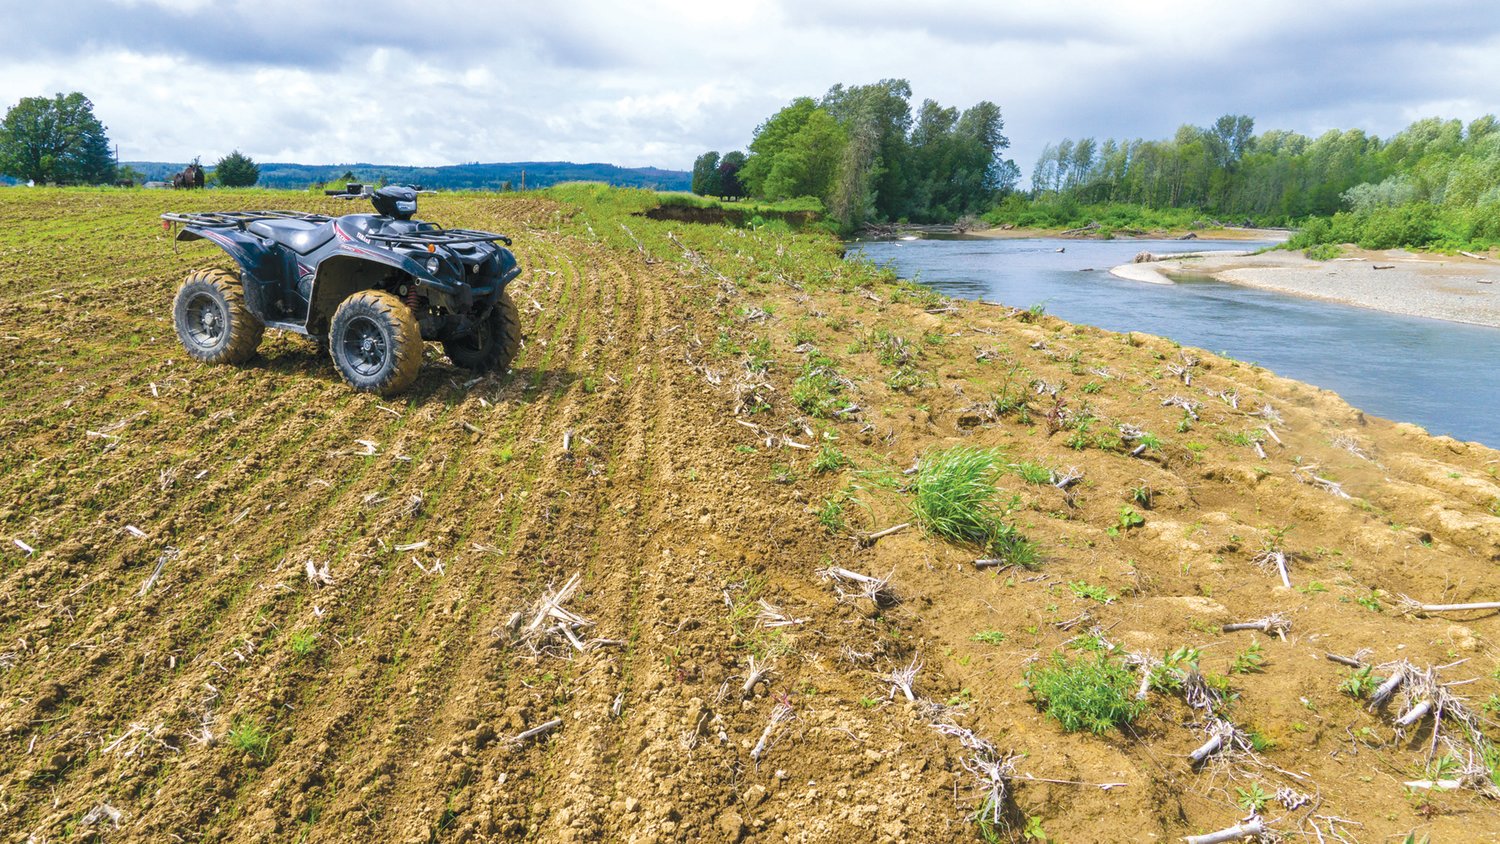 A quad is seen parked in a planted corn field along a bank at the confluence of the Satsop and Chehalis Rivers.